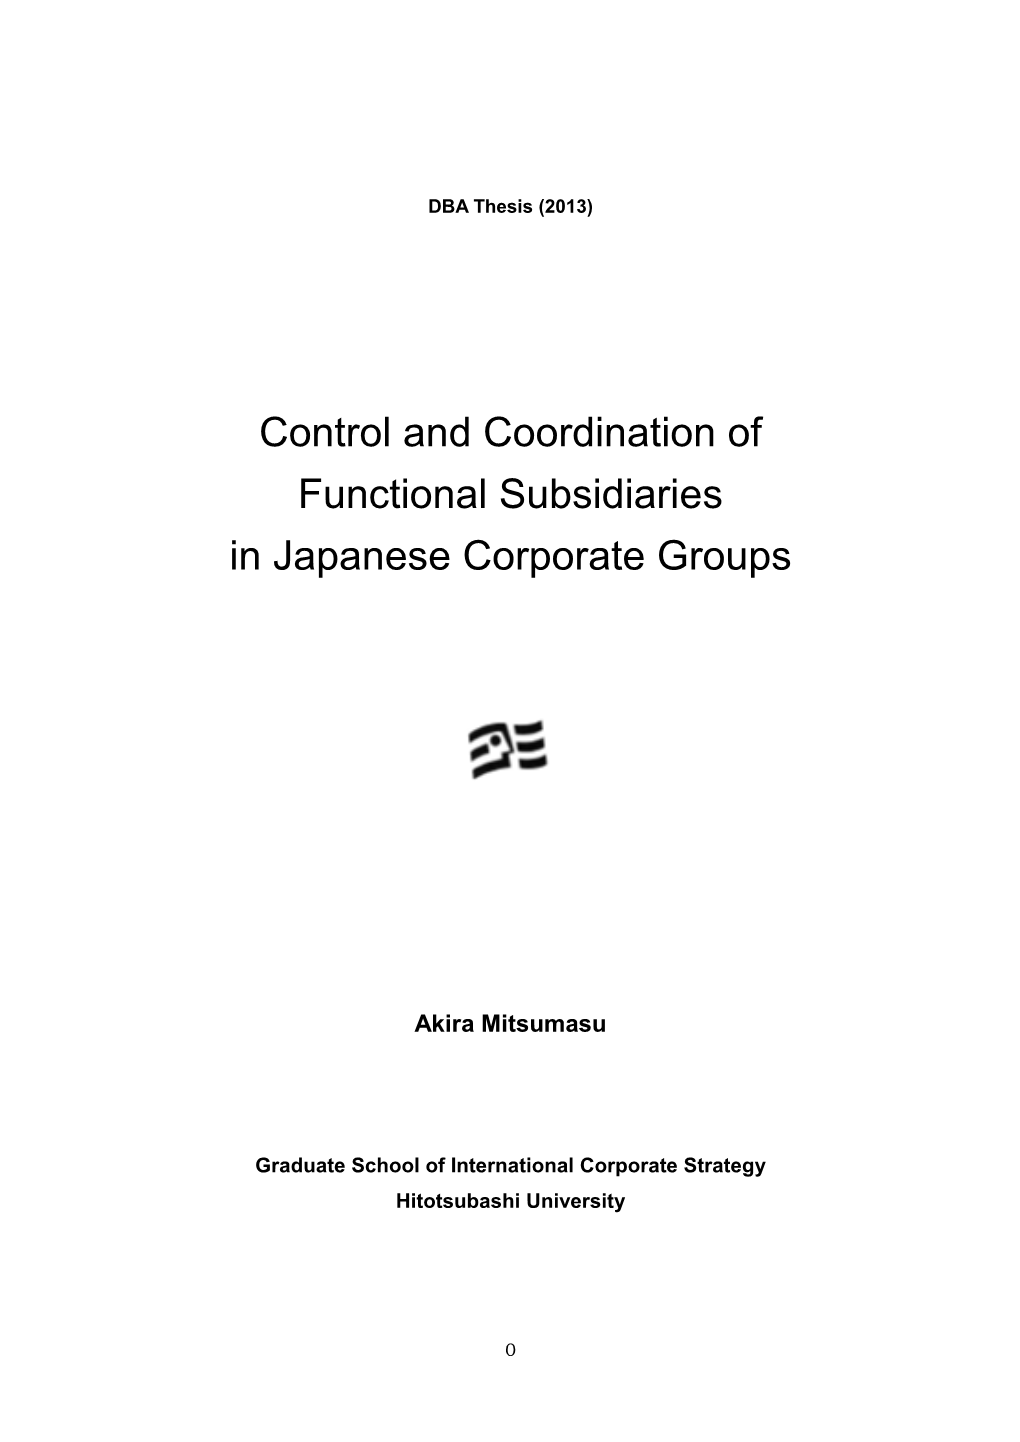 Control and Coordination of Functional Subsidiaries in Japanese Corporate Groups